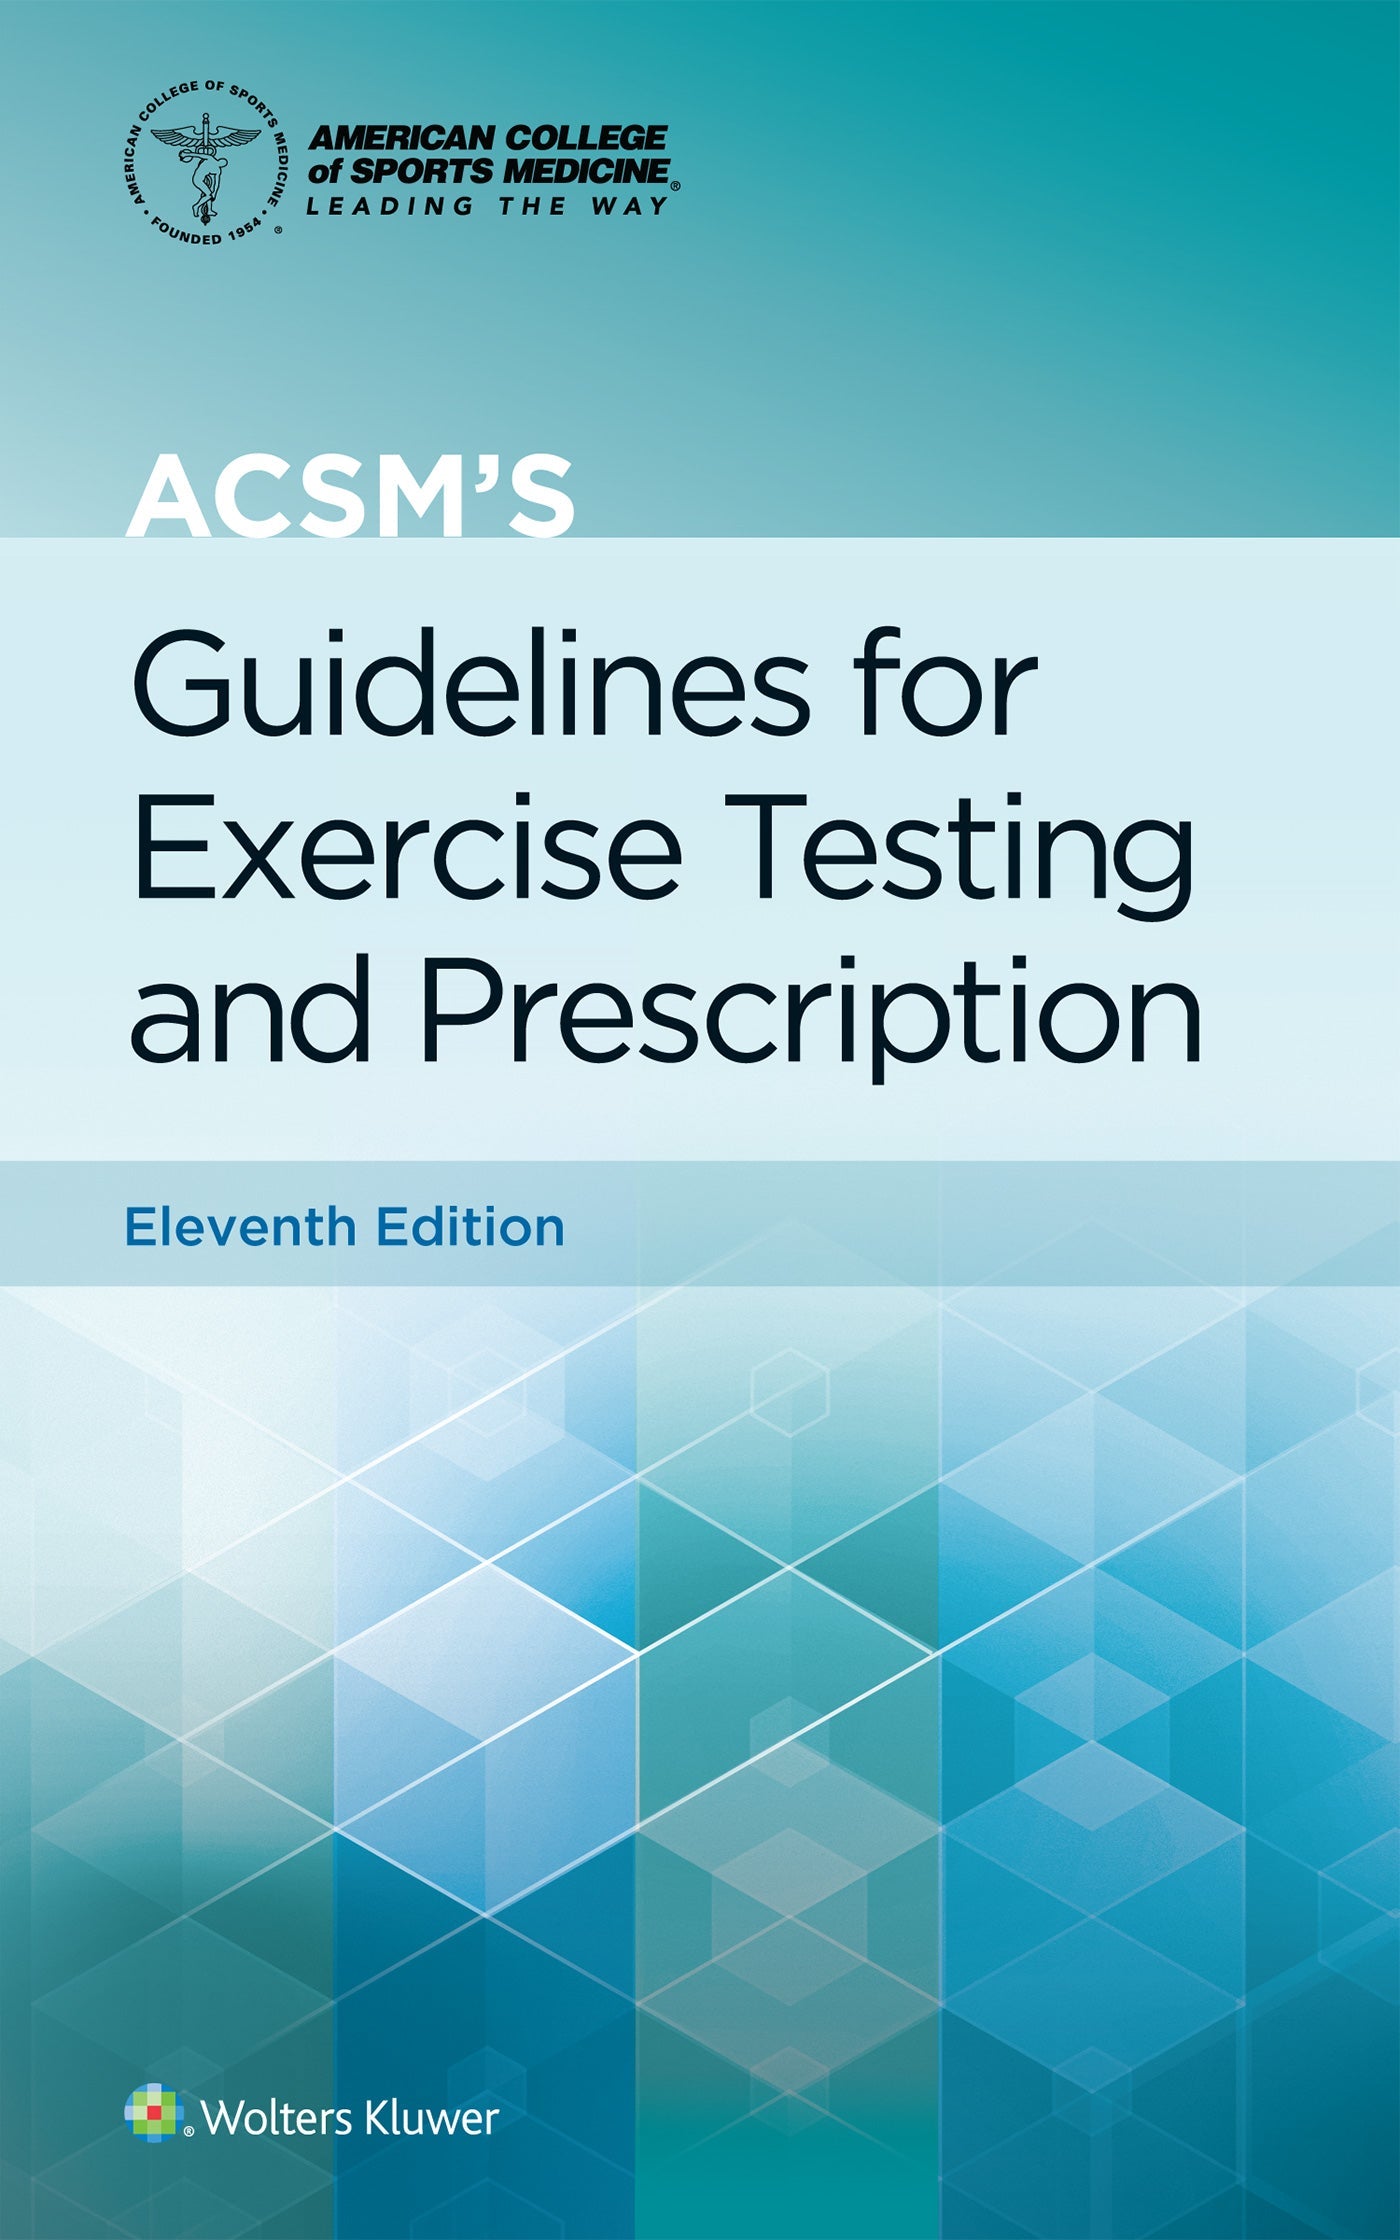 ACSM'S GUIDELINES FOR EXERCISE TESTING AND PRESCRIPTION ACSM